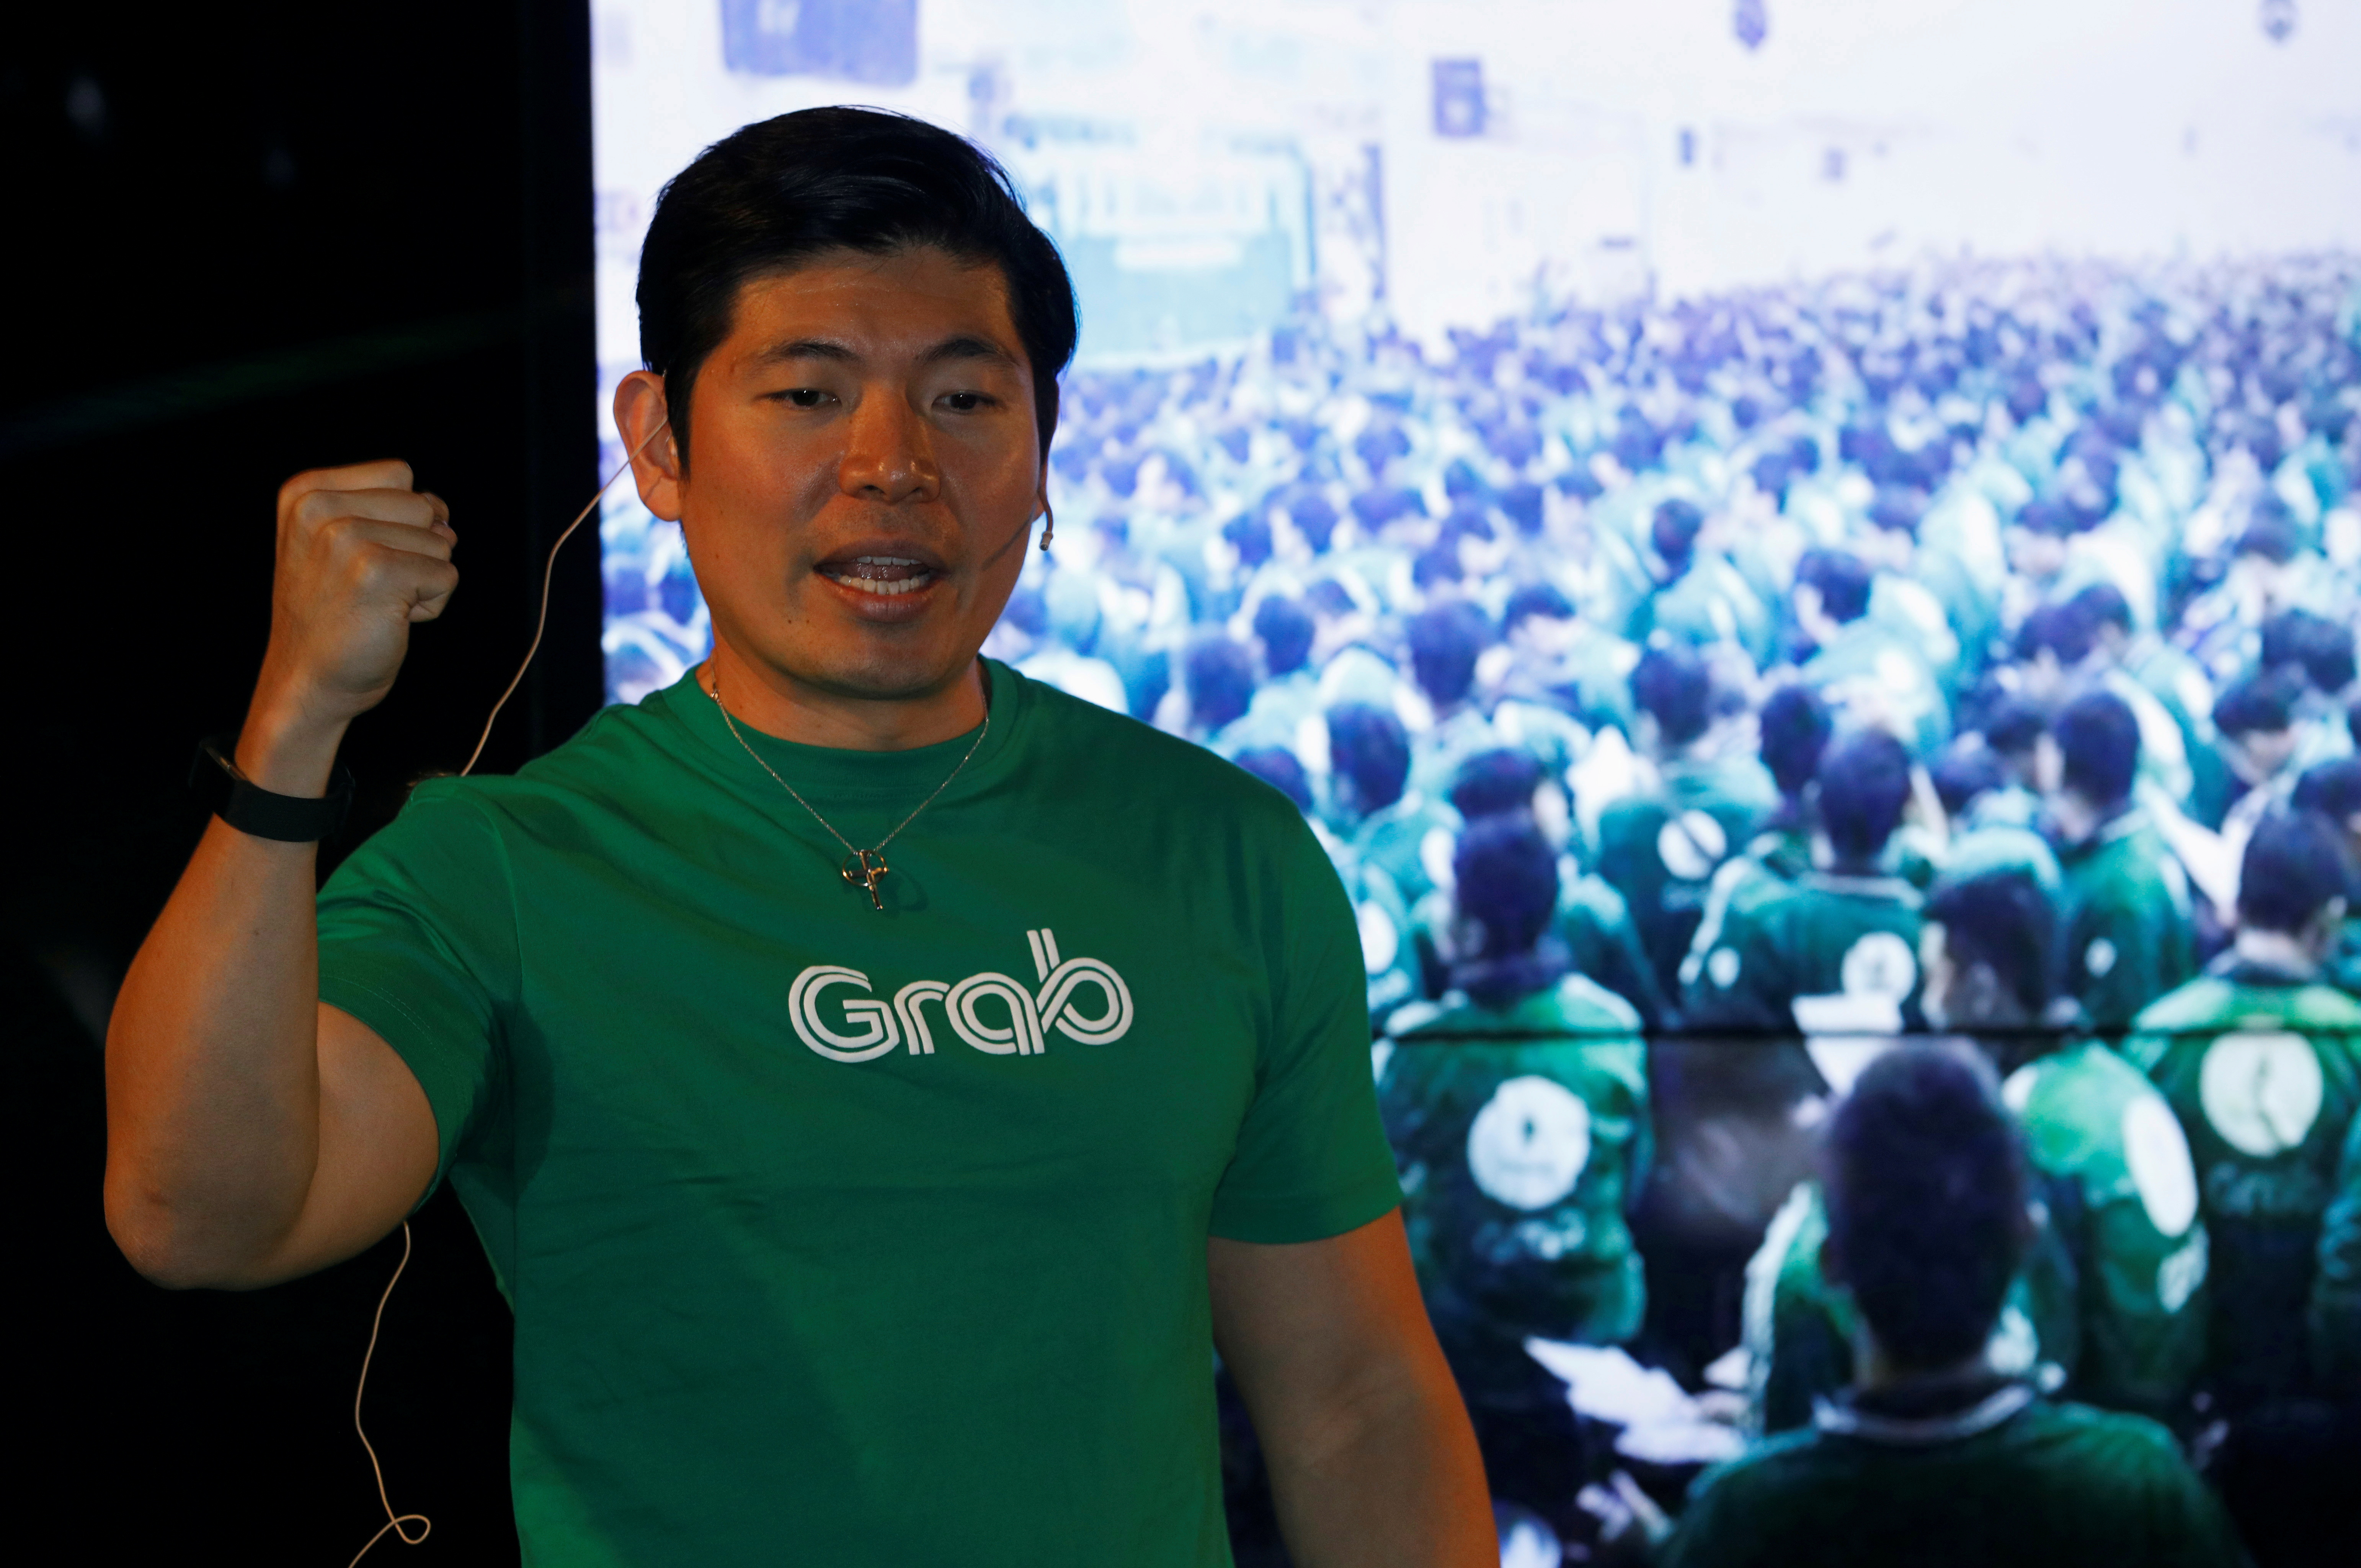 Grab's CEO Anthony Tan speaks during Grab's fifth anniversary news conference in Singapore June 6, 2017. REUTERS/Edgar Su